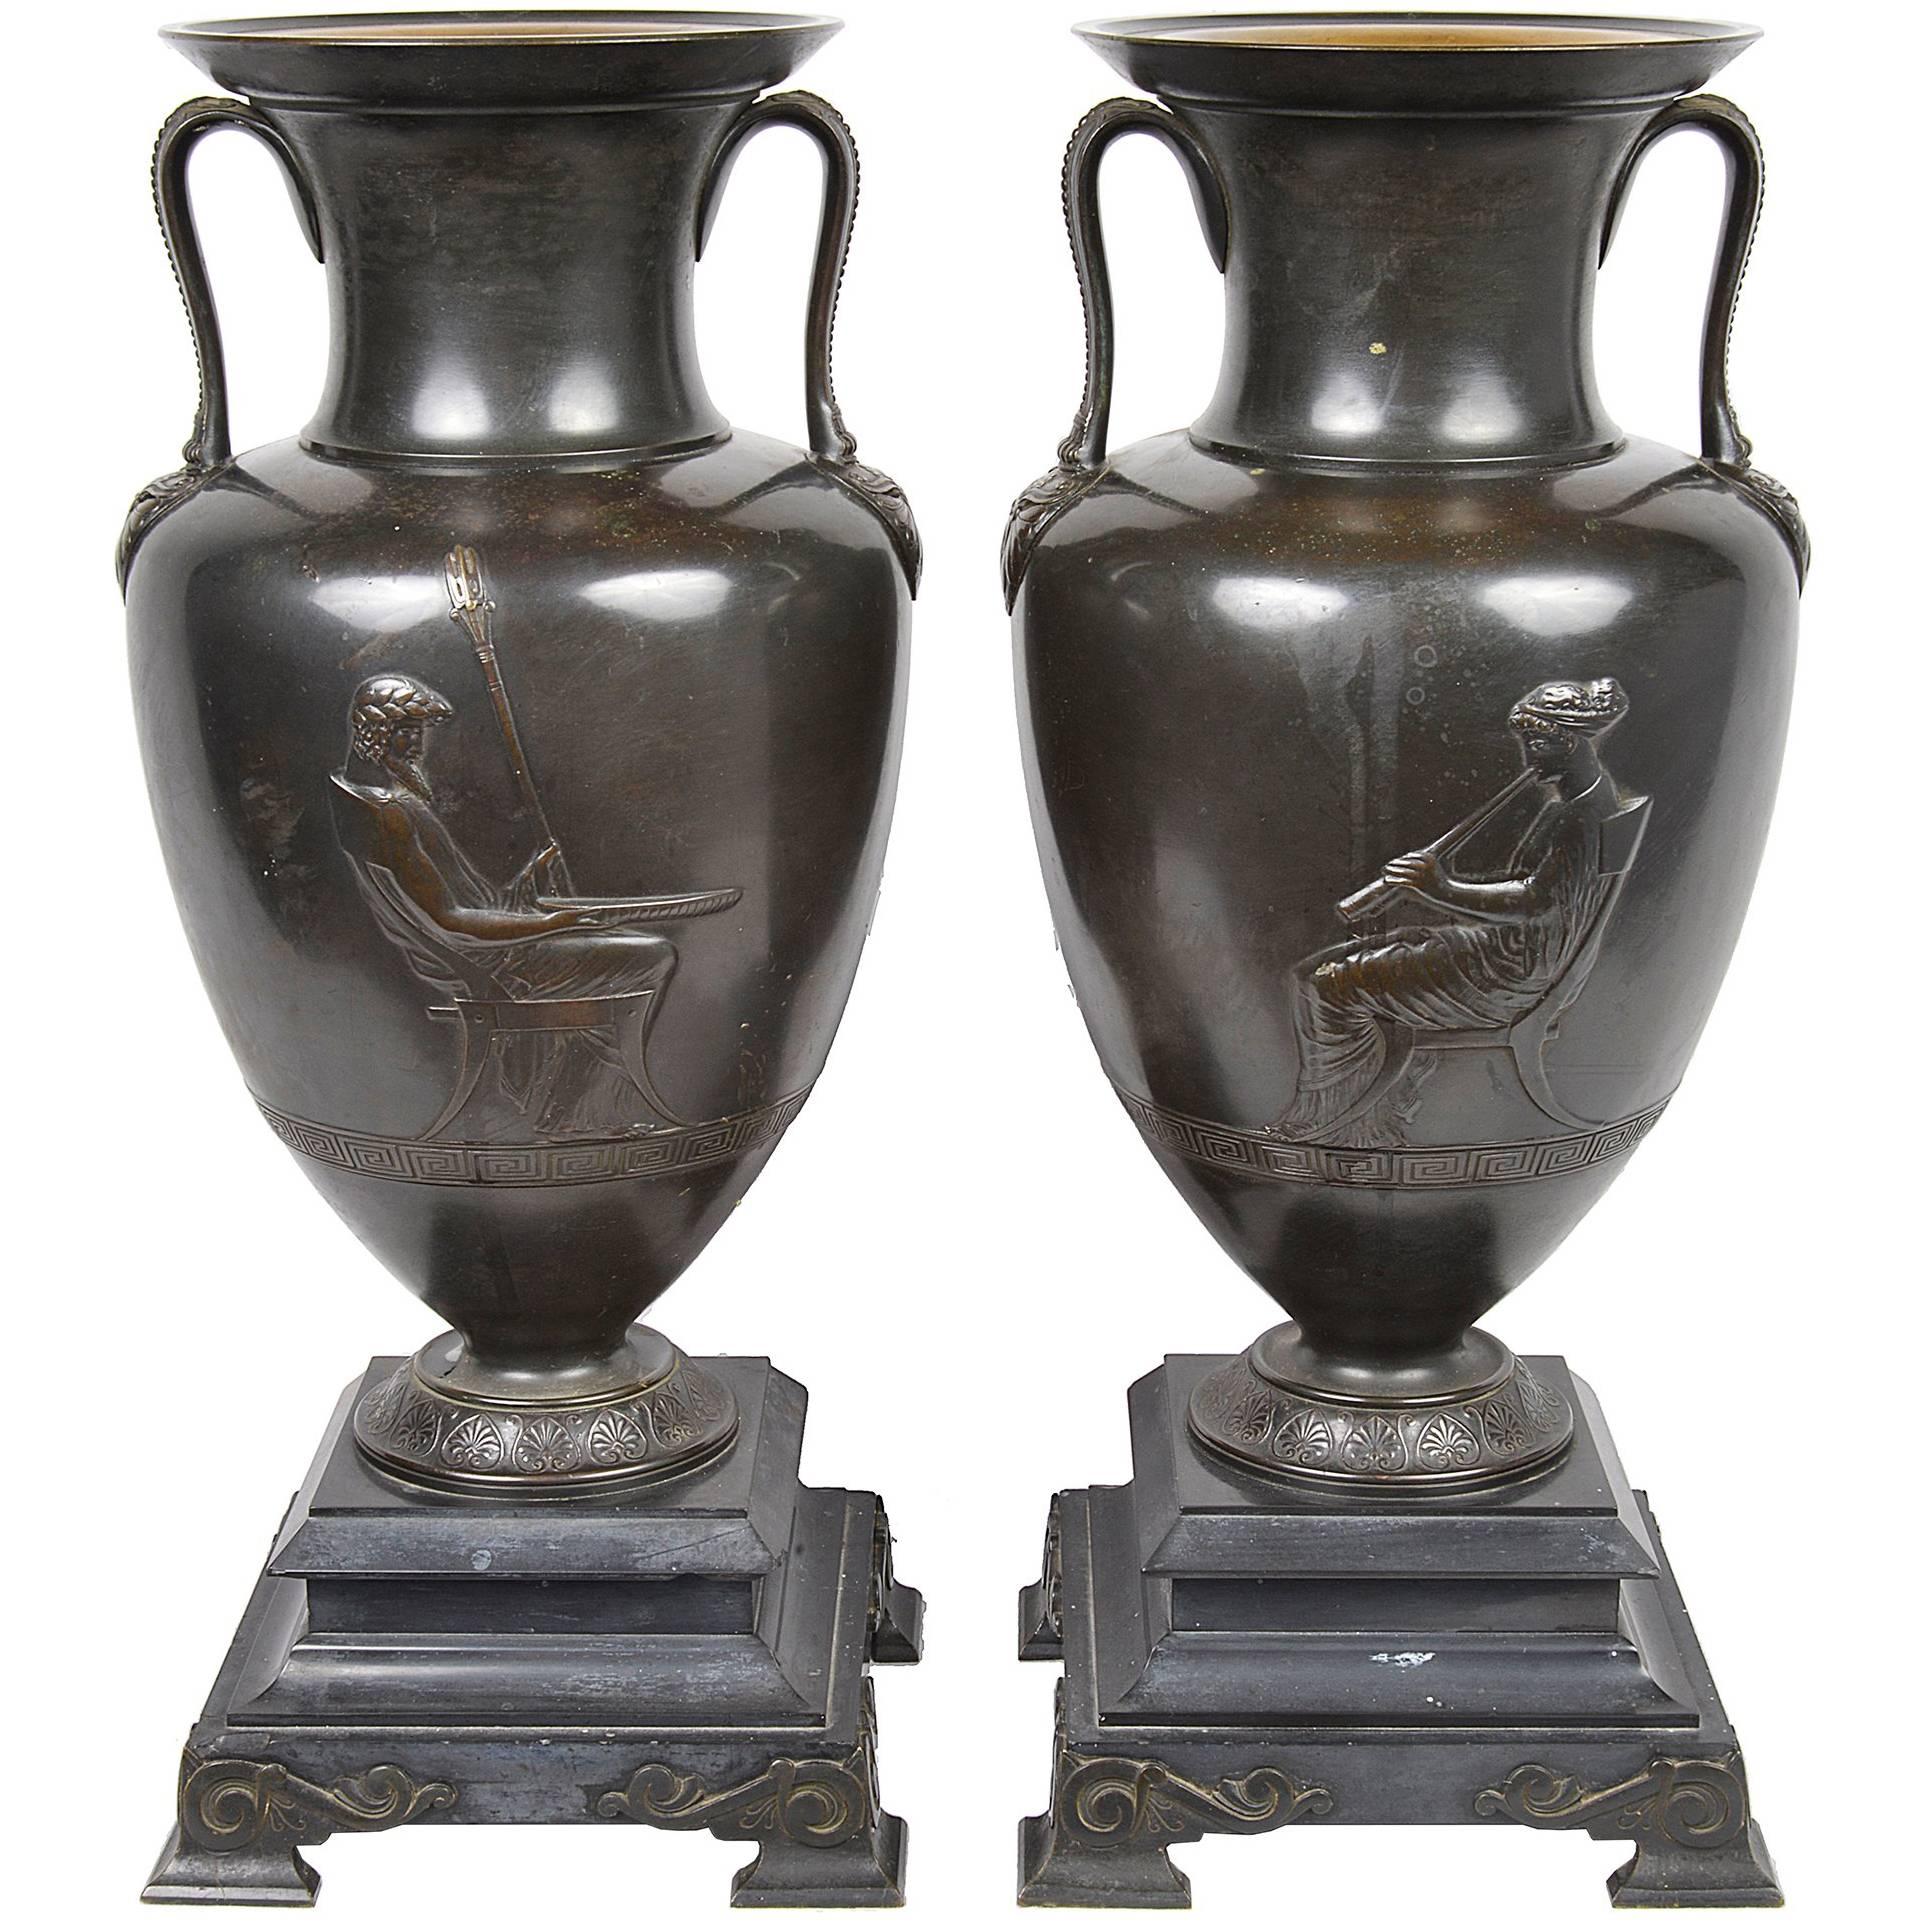 Pair of 19th Century French Bronze Neoclassical Urns